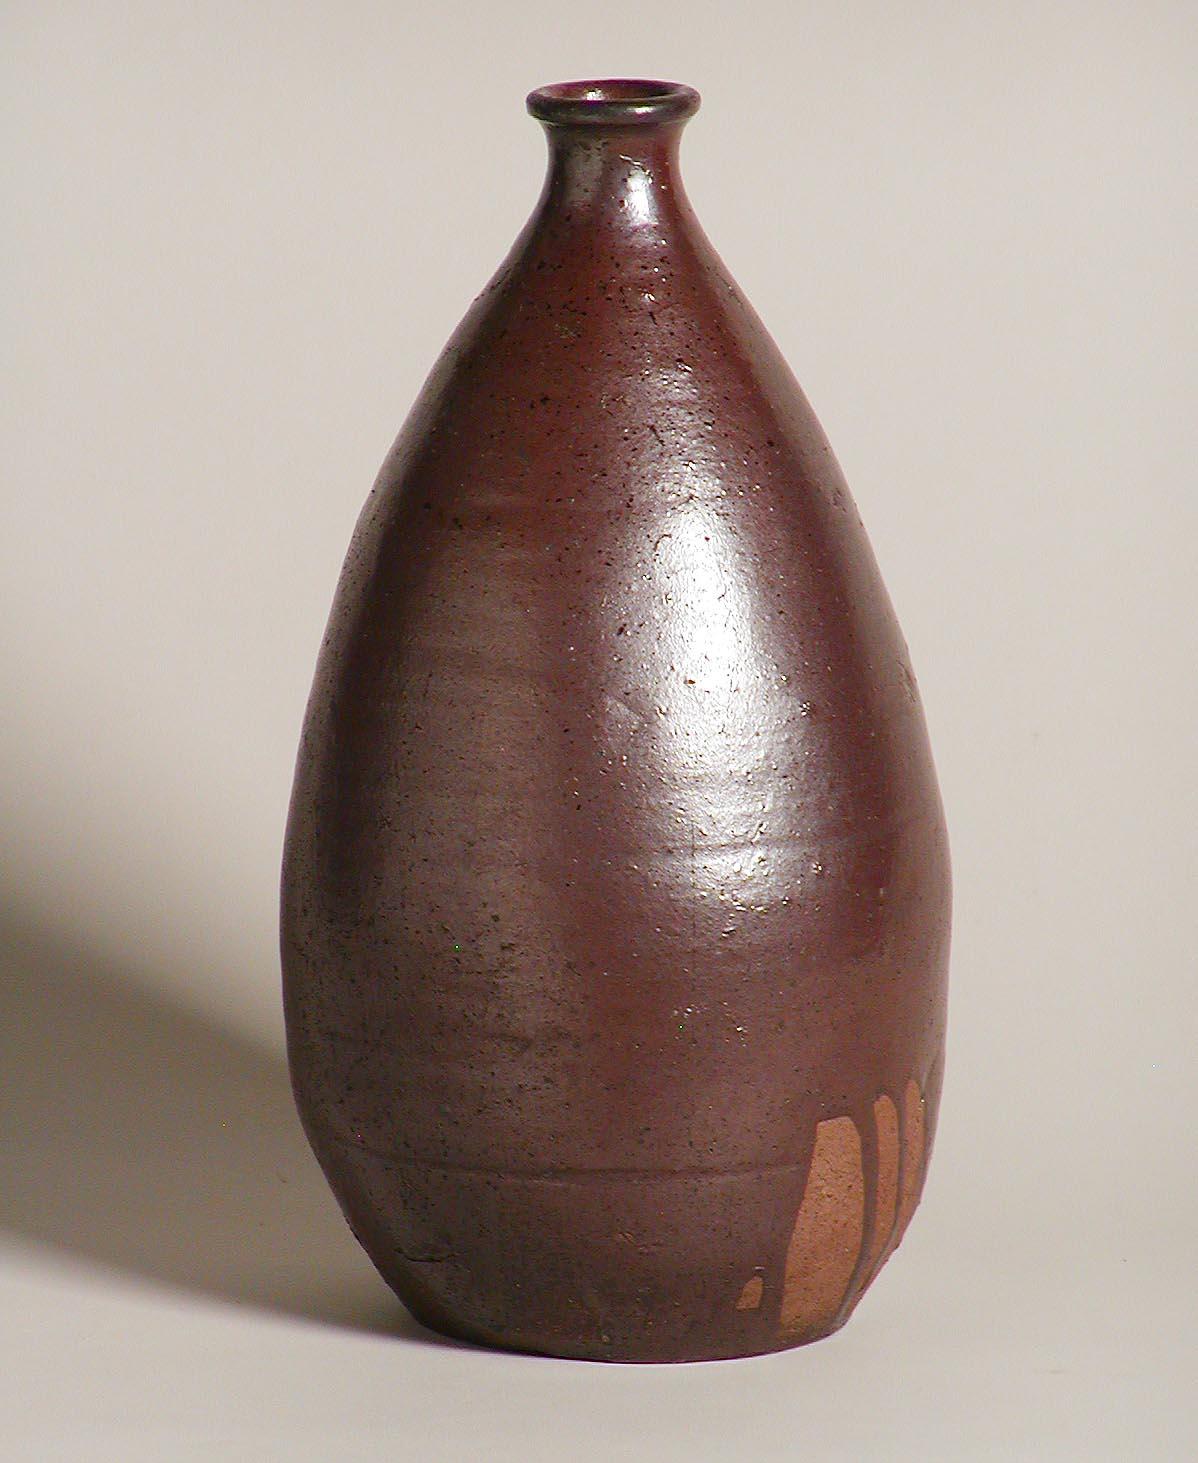 Japanese ceramic Tamba aka-dobe tokkuri, a red clay bottle vase from the Tamba kilns, a wide bodied tapering form with narrow short neck and slightly everted mouth rim covered in an iron red brown clay based glaze with a small lower section having